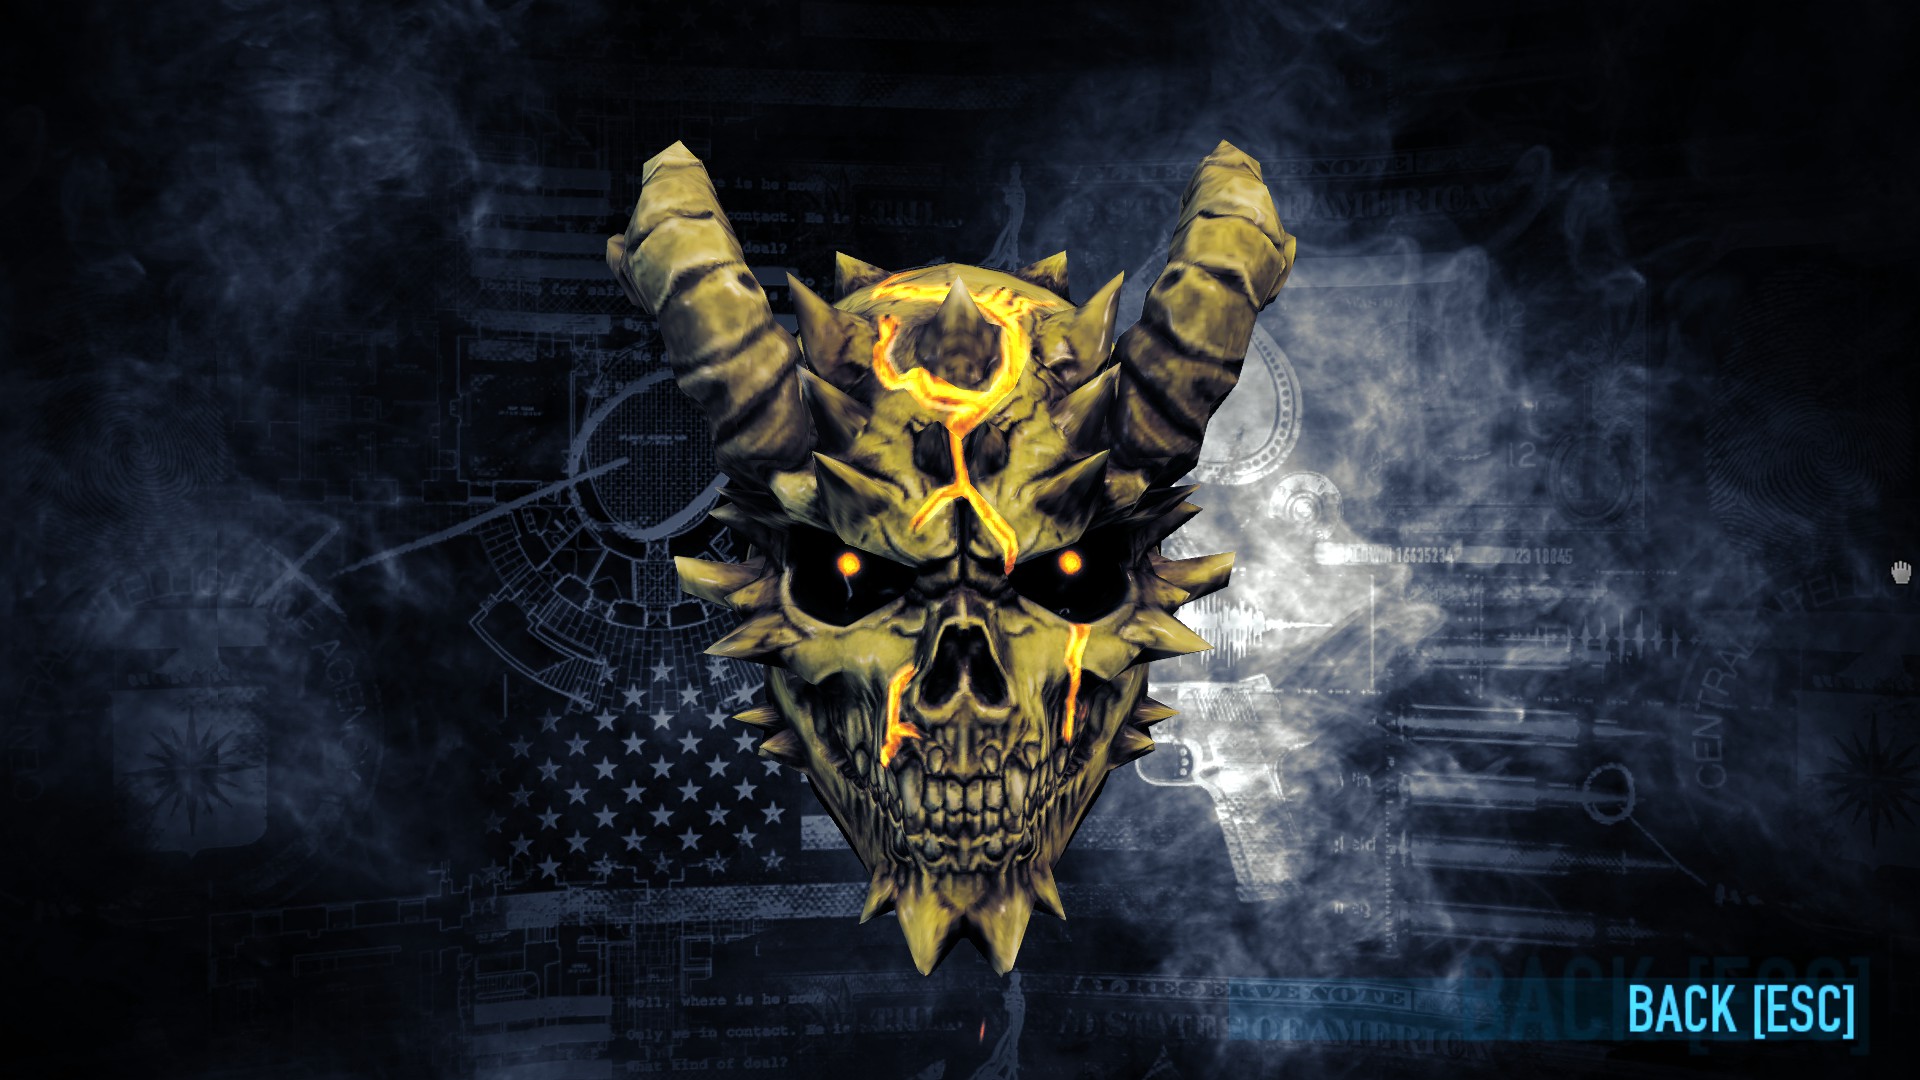 Death Wish Skull - Payday 2 Deathwish Skull , HD Wallpaper & Backgrounds